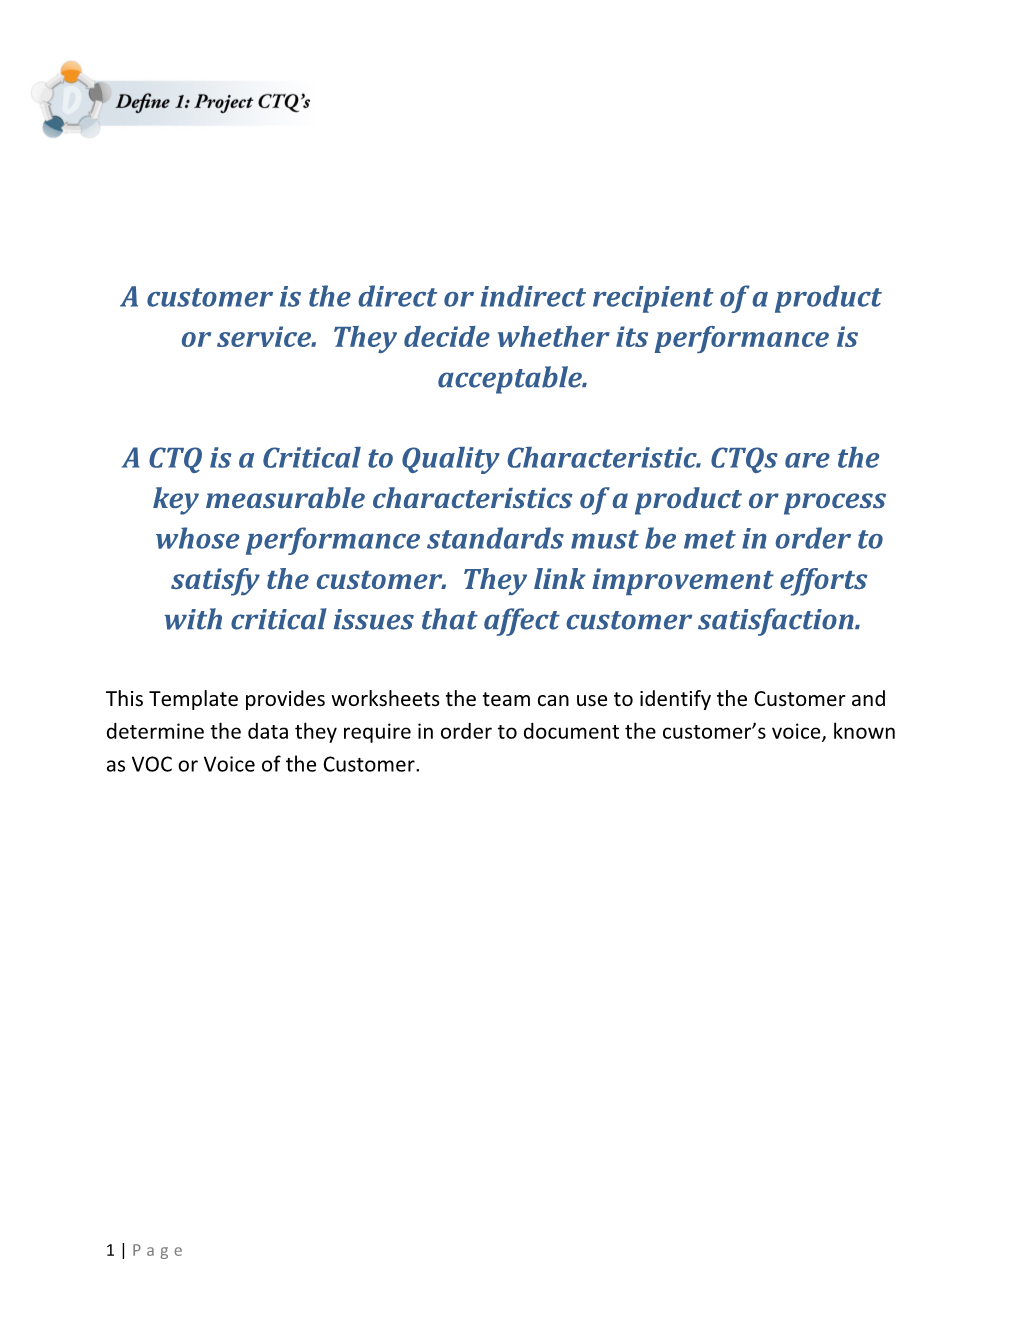 A Customer Is the Direct Or Indirect Recipient of a Product Or Service. They Decide Whether